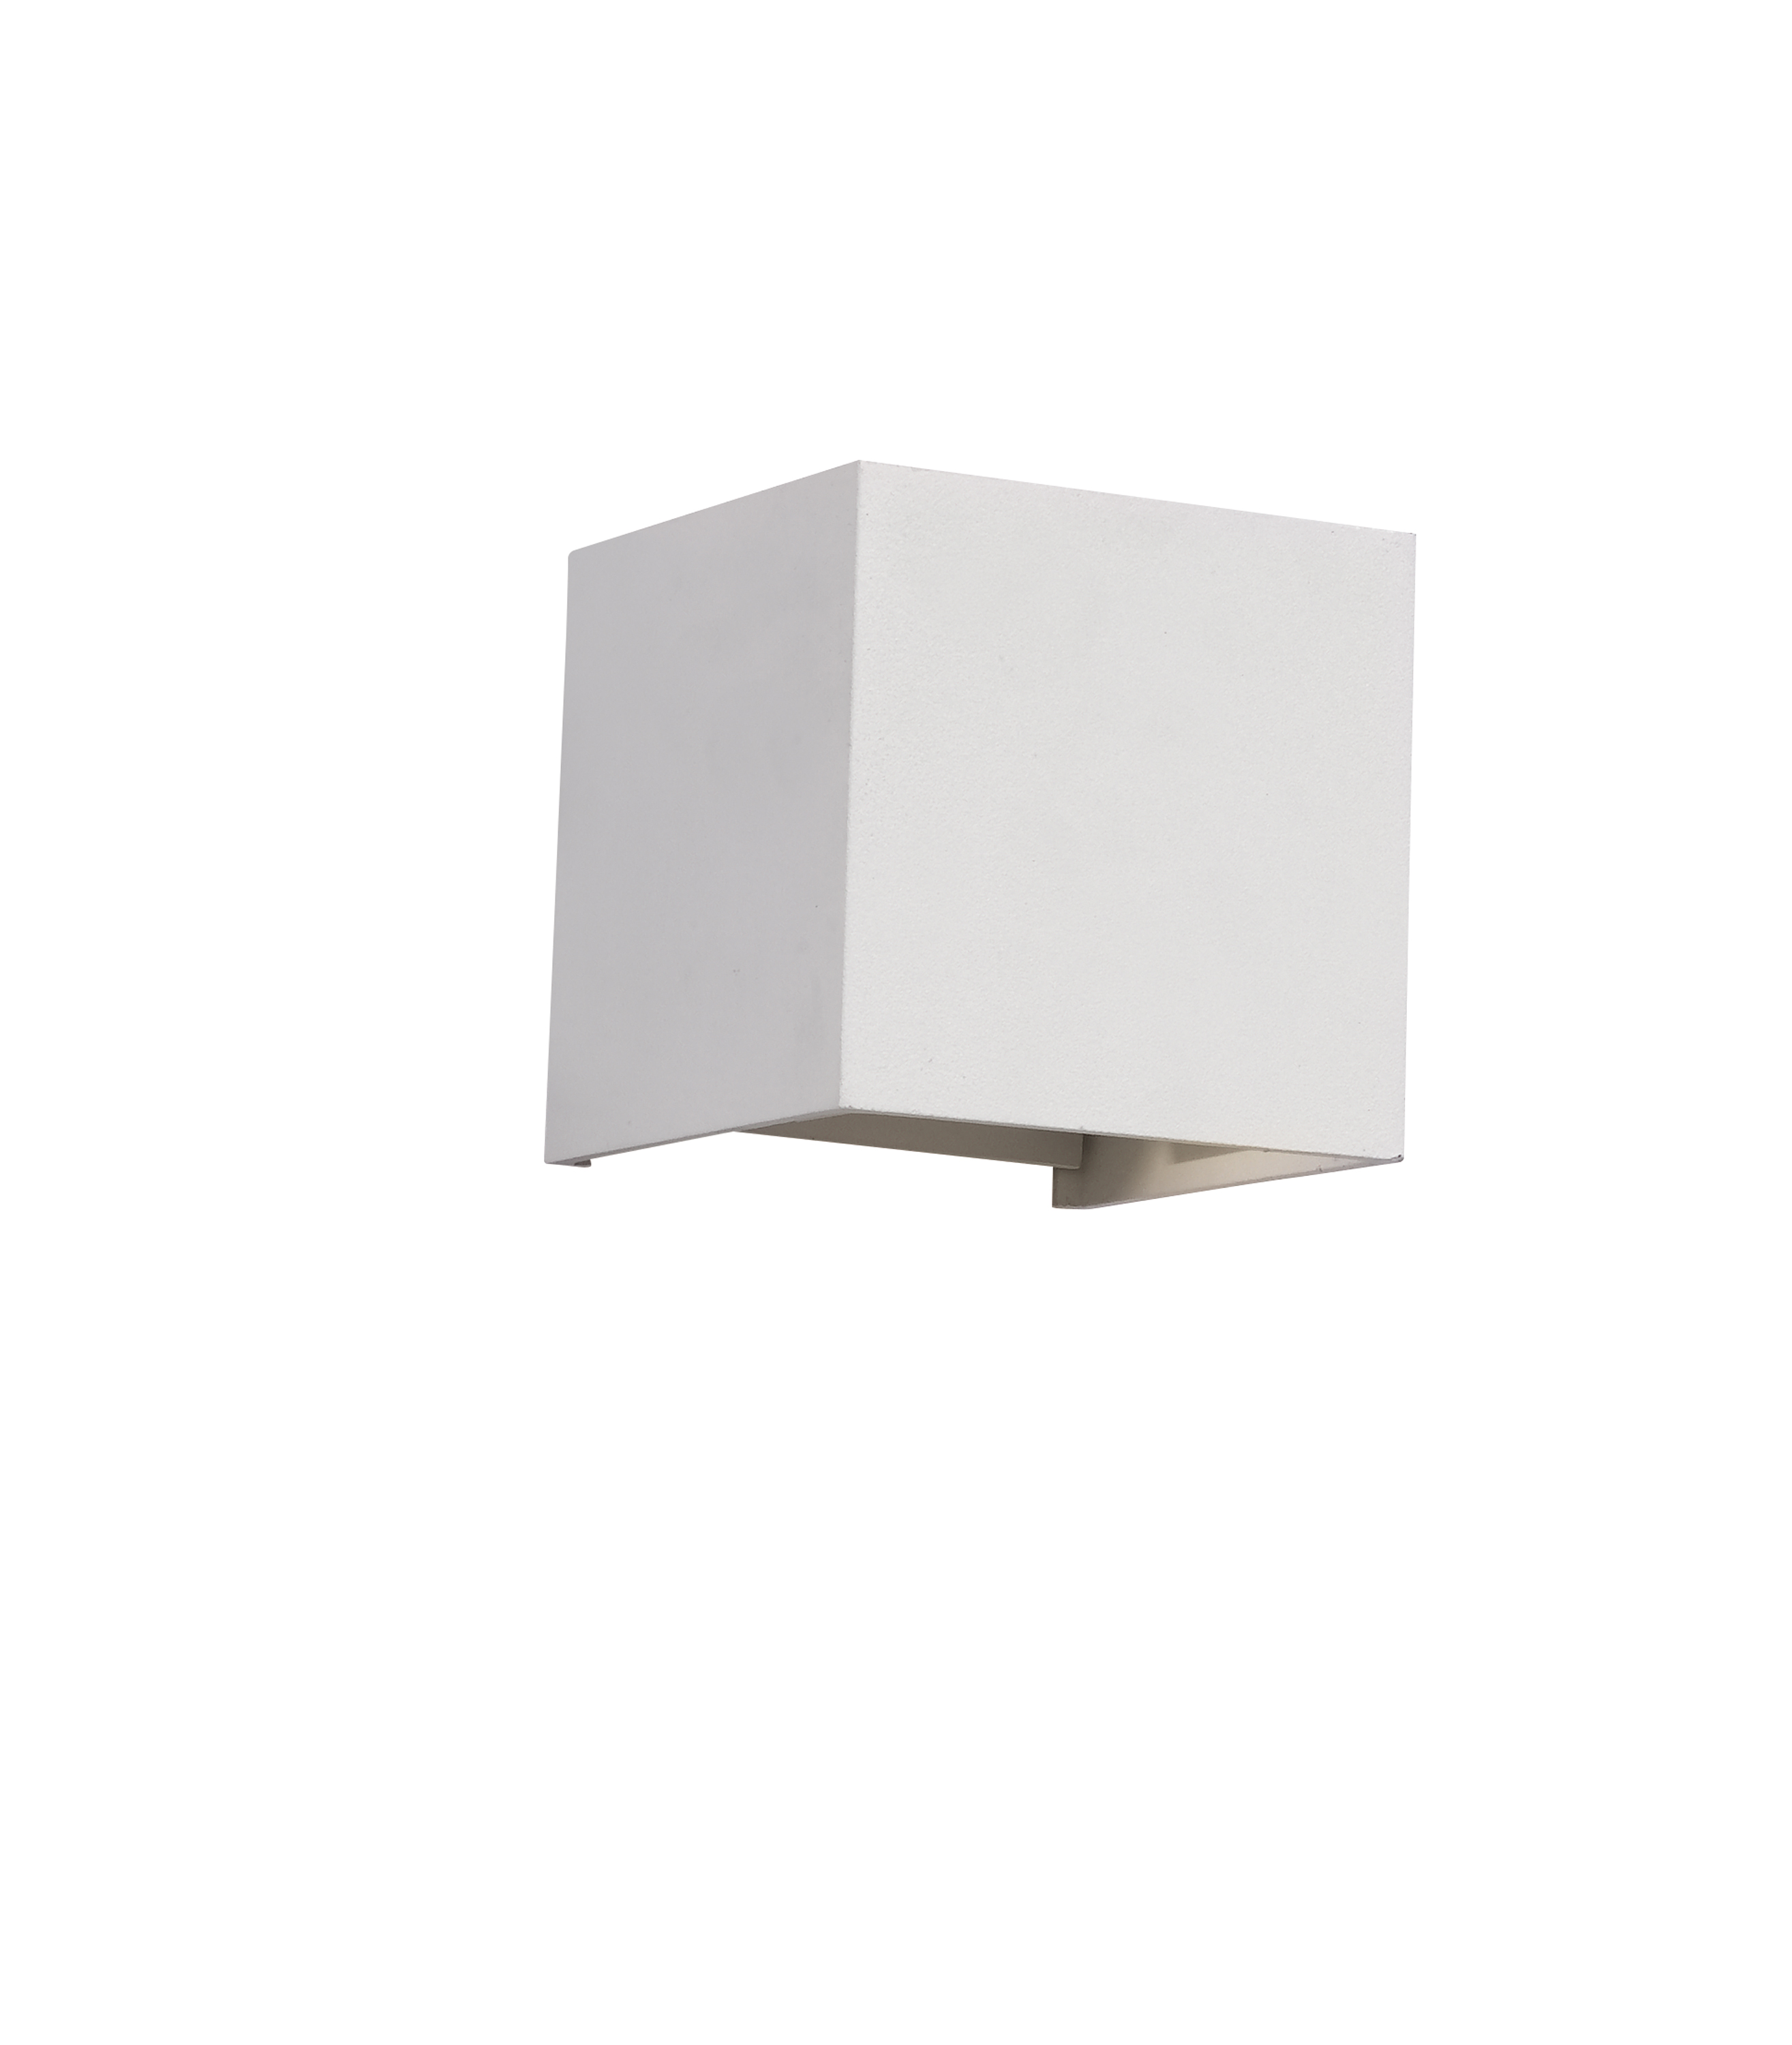 Oteshen Best Sell External Wall Lighting Waterproof Recessed LED Lights Wall Modern Style Rectangle Wall Light